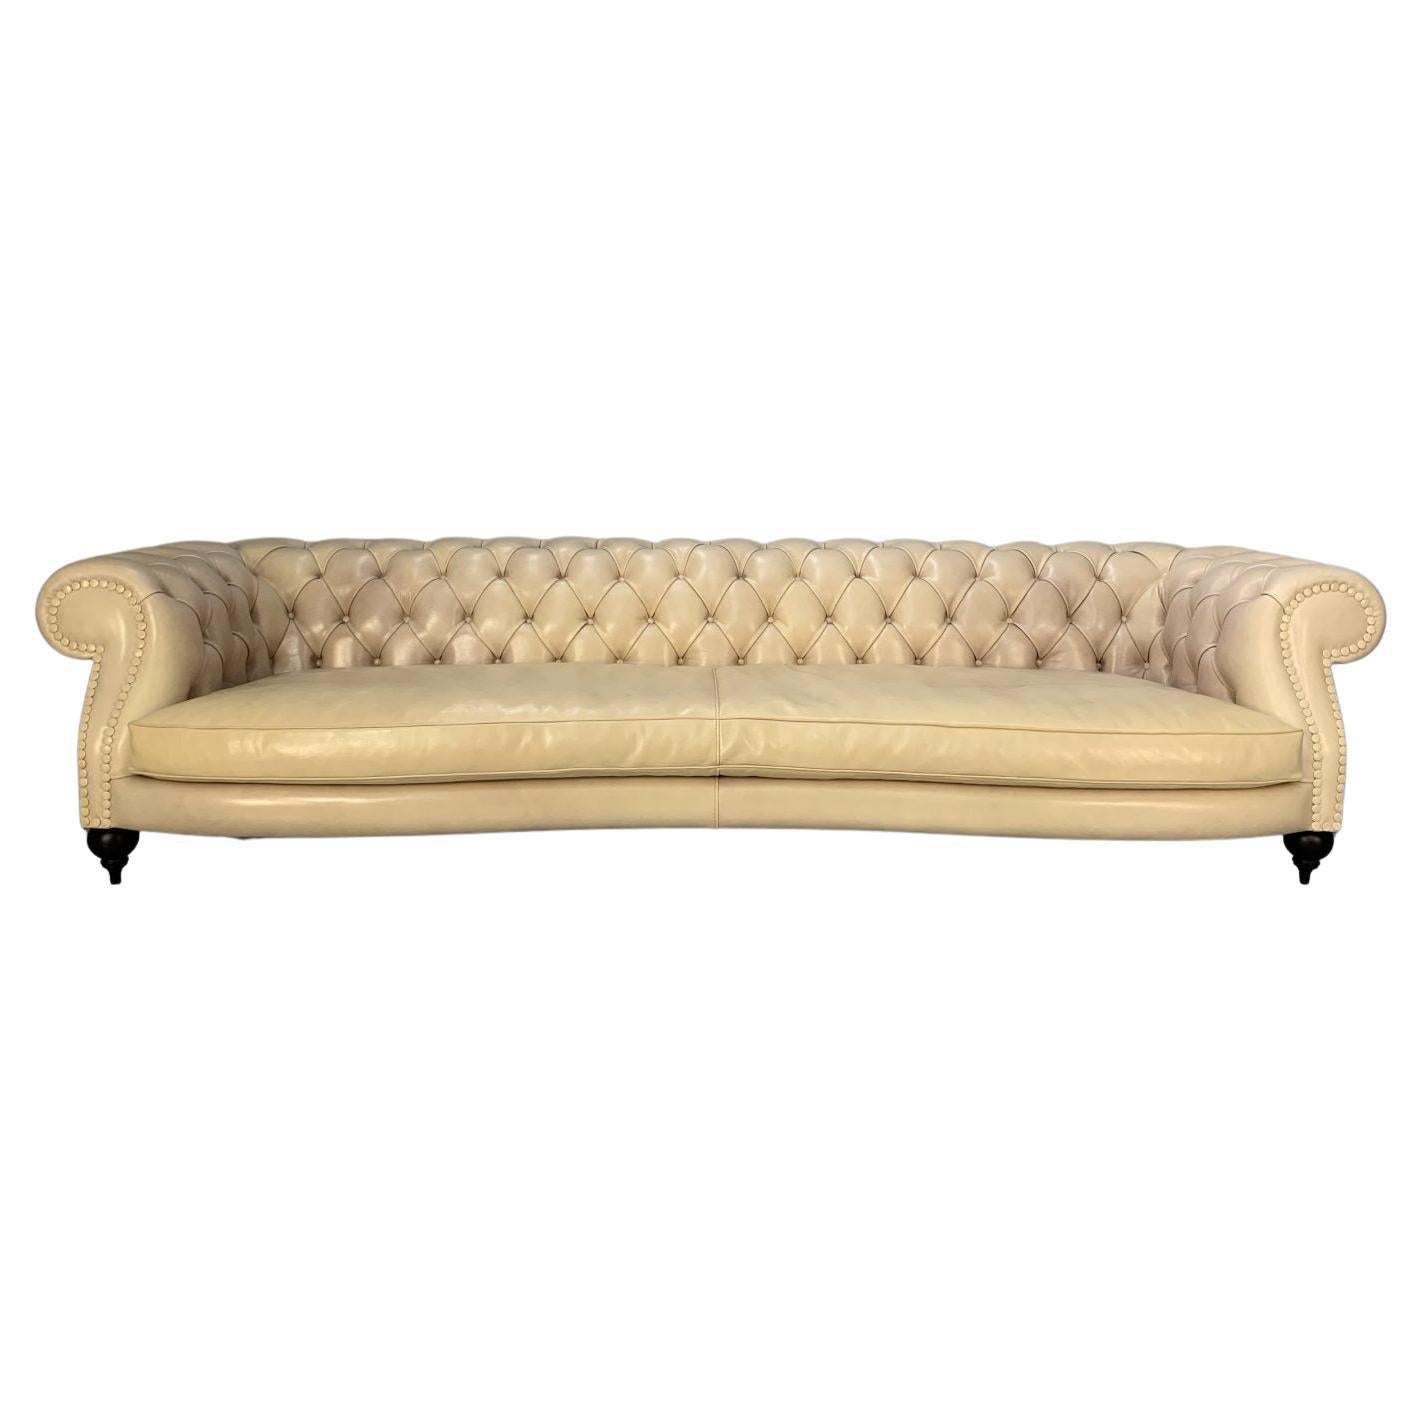 Baxter of Italy “Diana Chester” 4-Seat Sofa in Cream “Tuscany” Leather For Sale